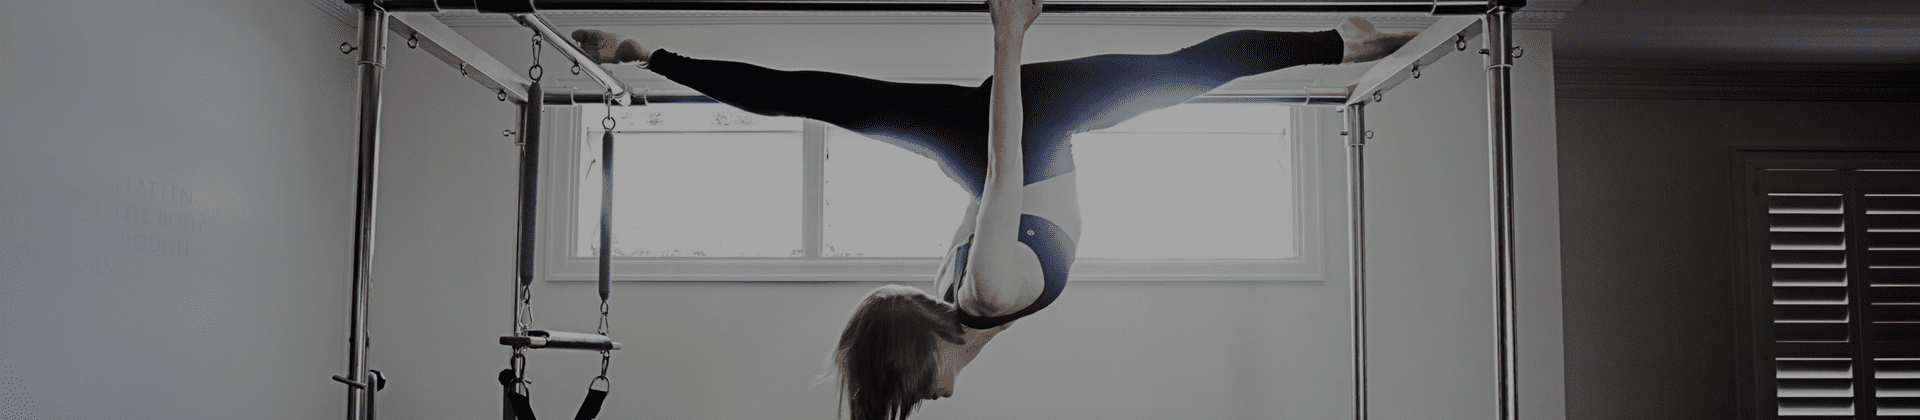 5 Reasons to Become Cadillac Certified - Studio Pilates